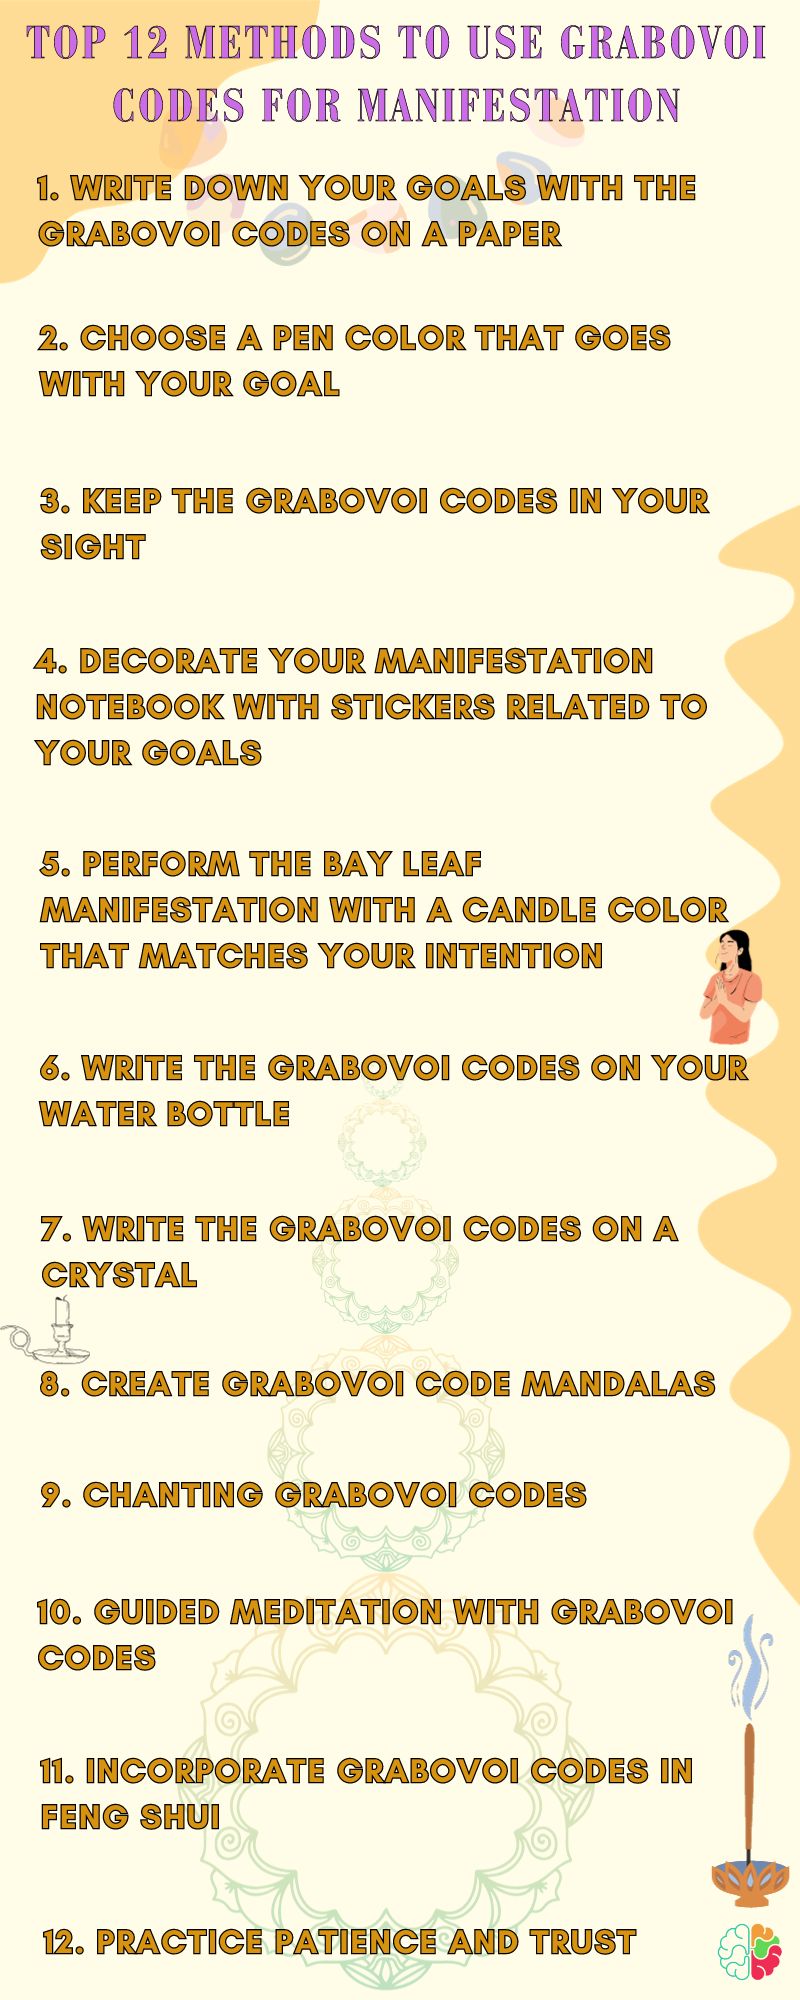 Top 12 Methods To Use Grabovoi Codes For Manifestation